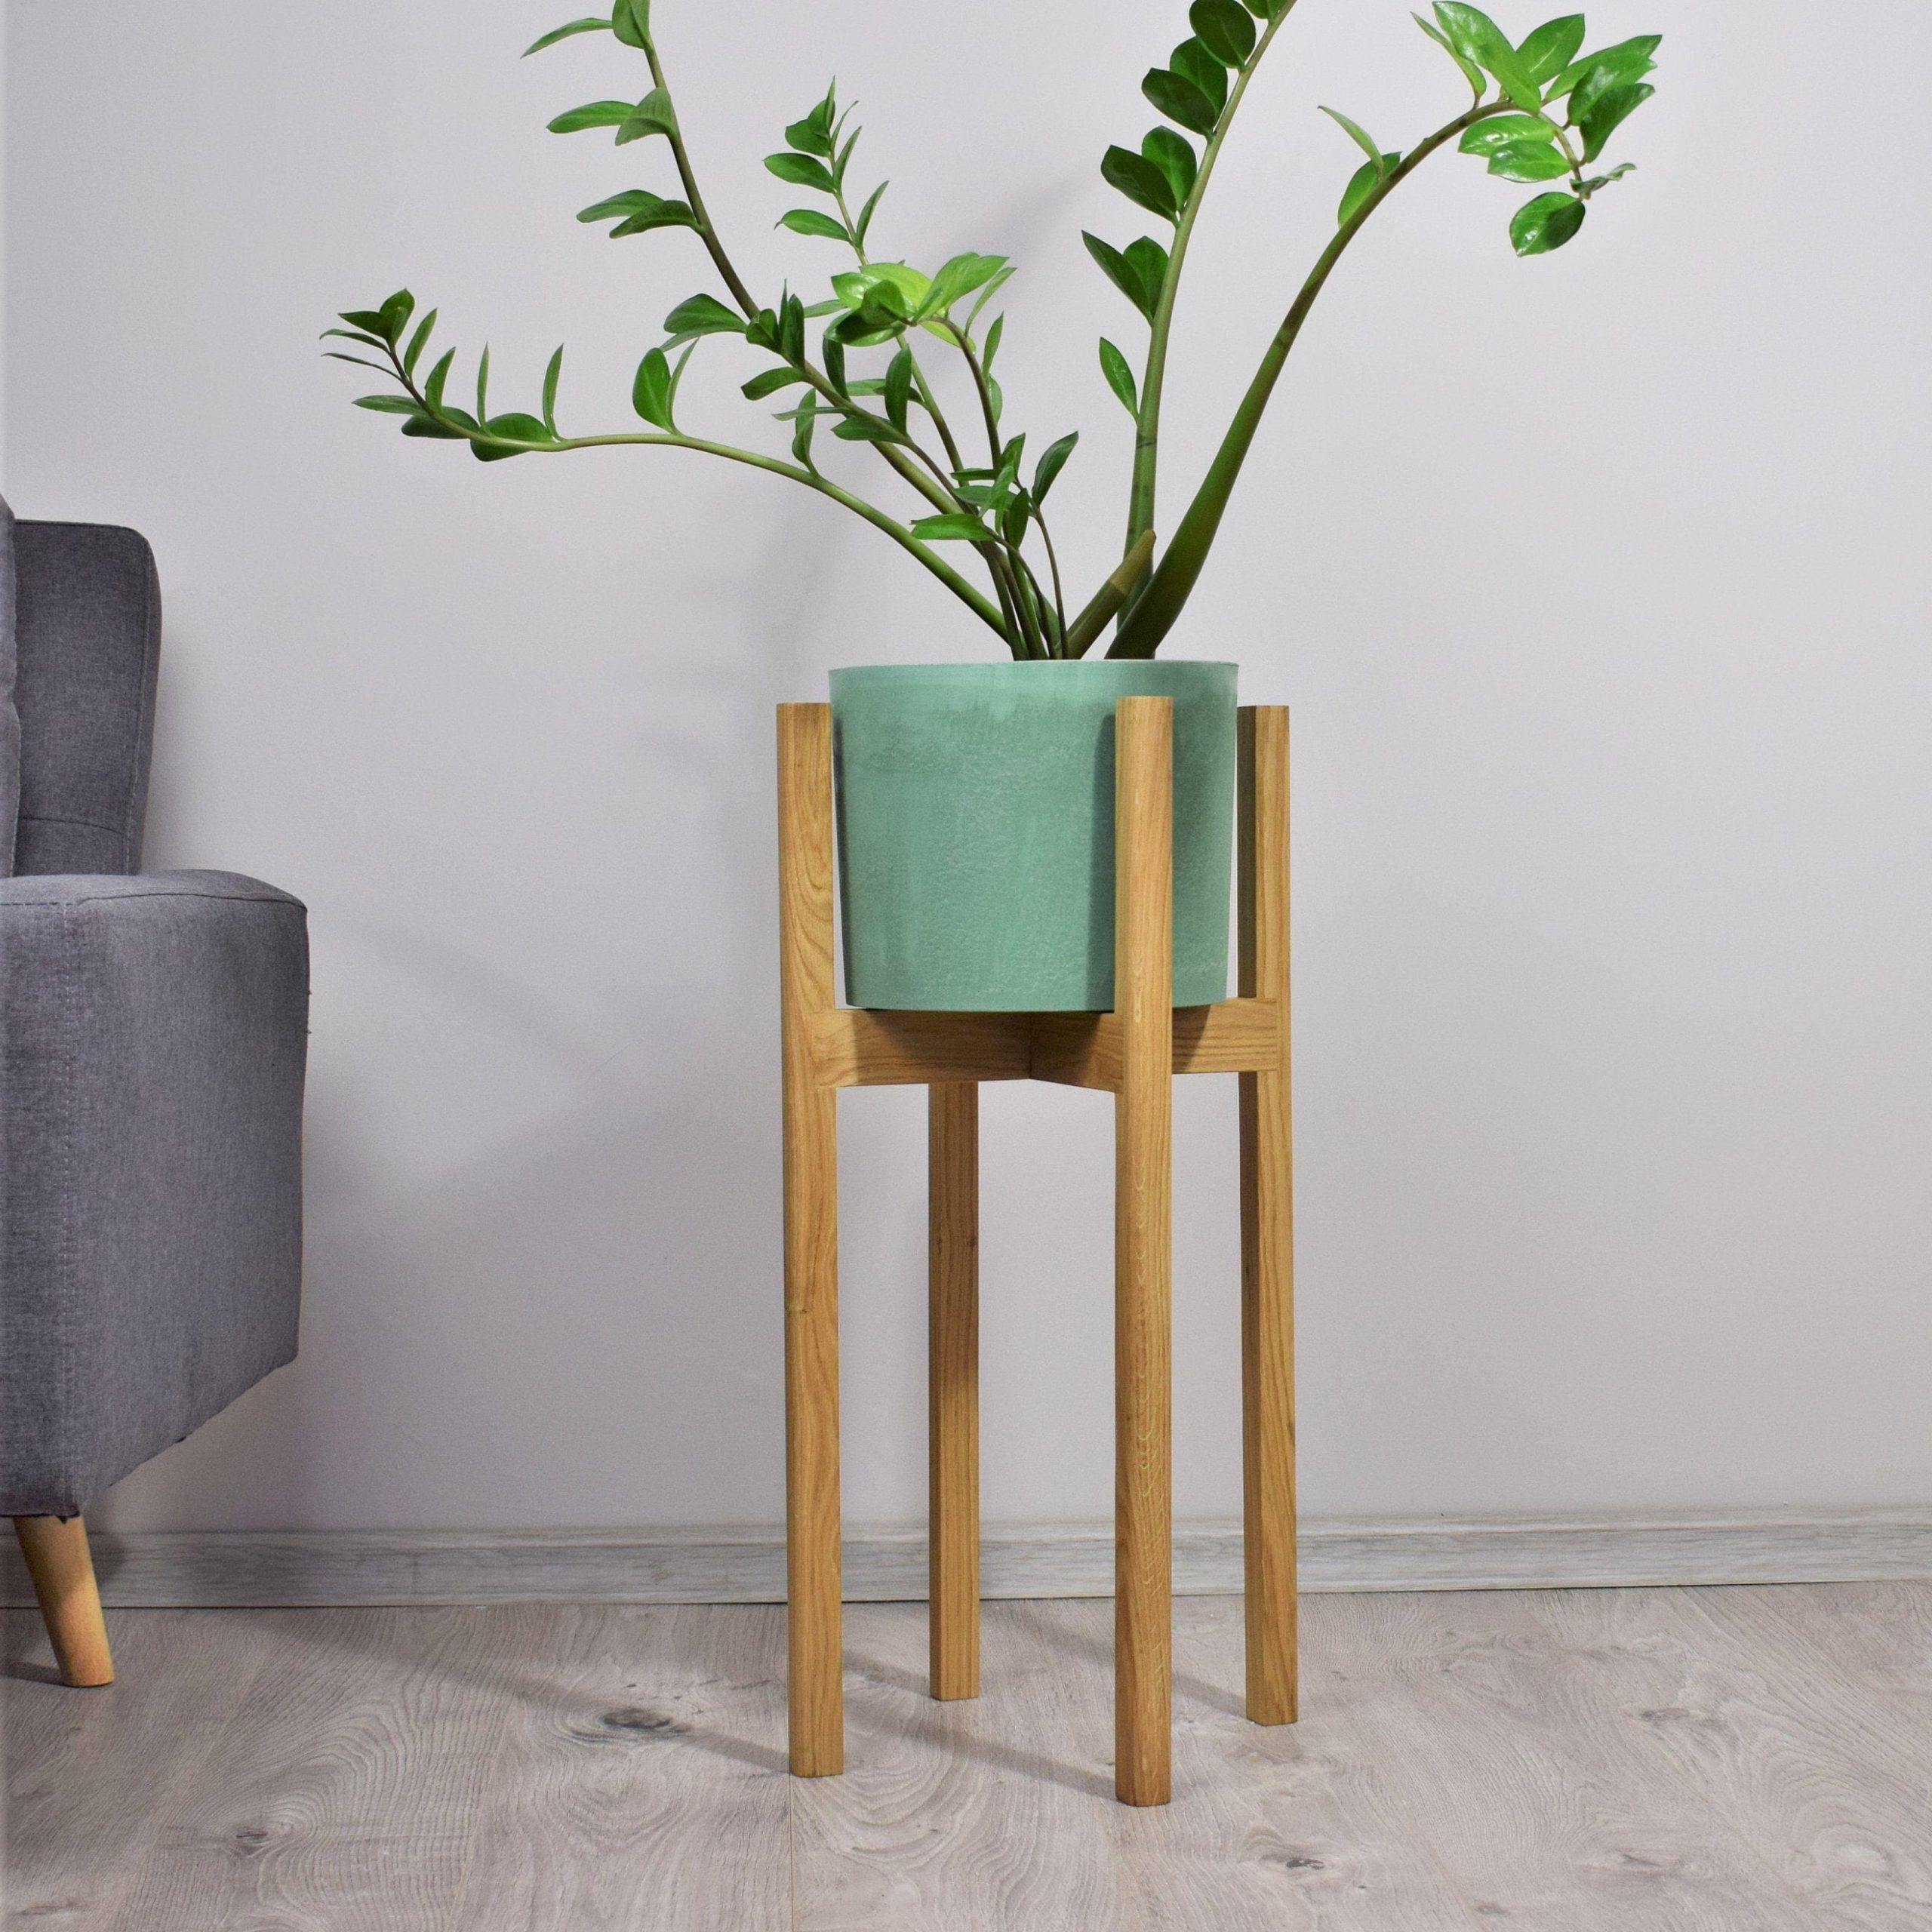 Tall Plant Stands Made Of Natural Oak Wood (View 2 of 10)